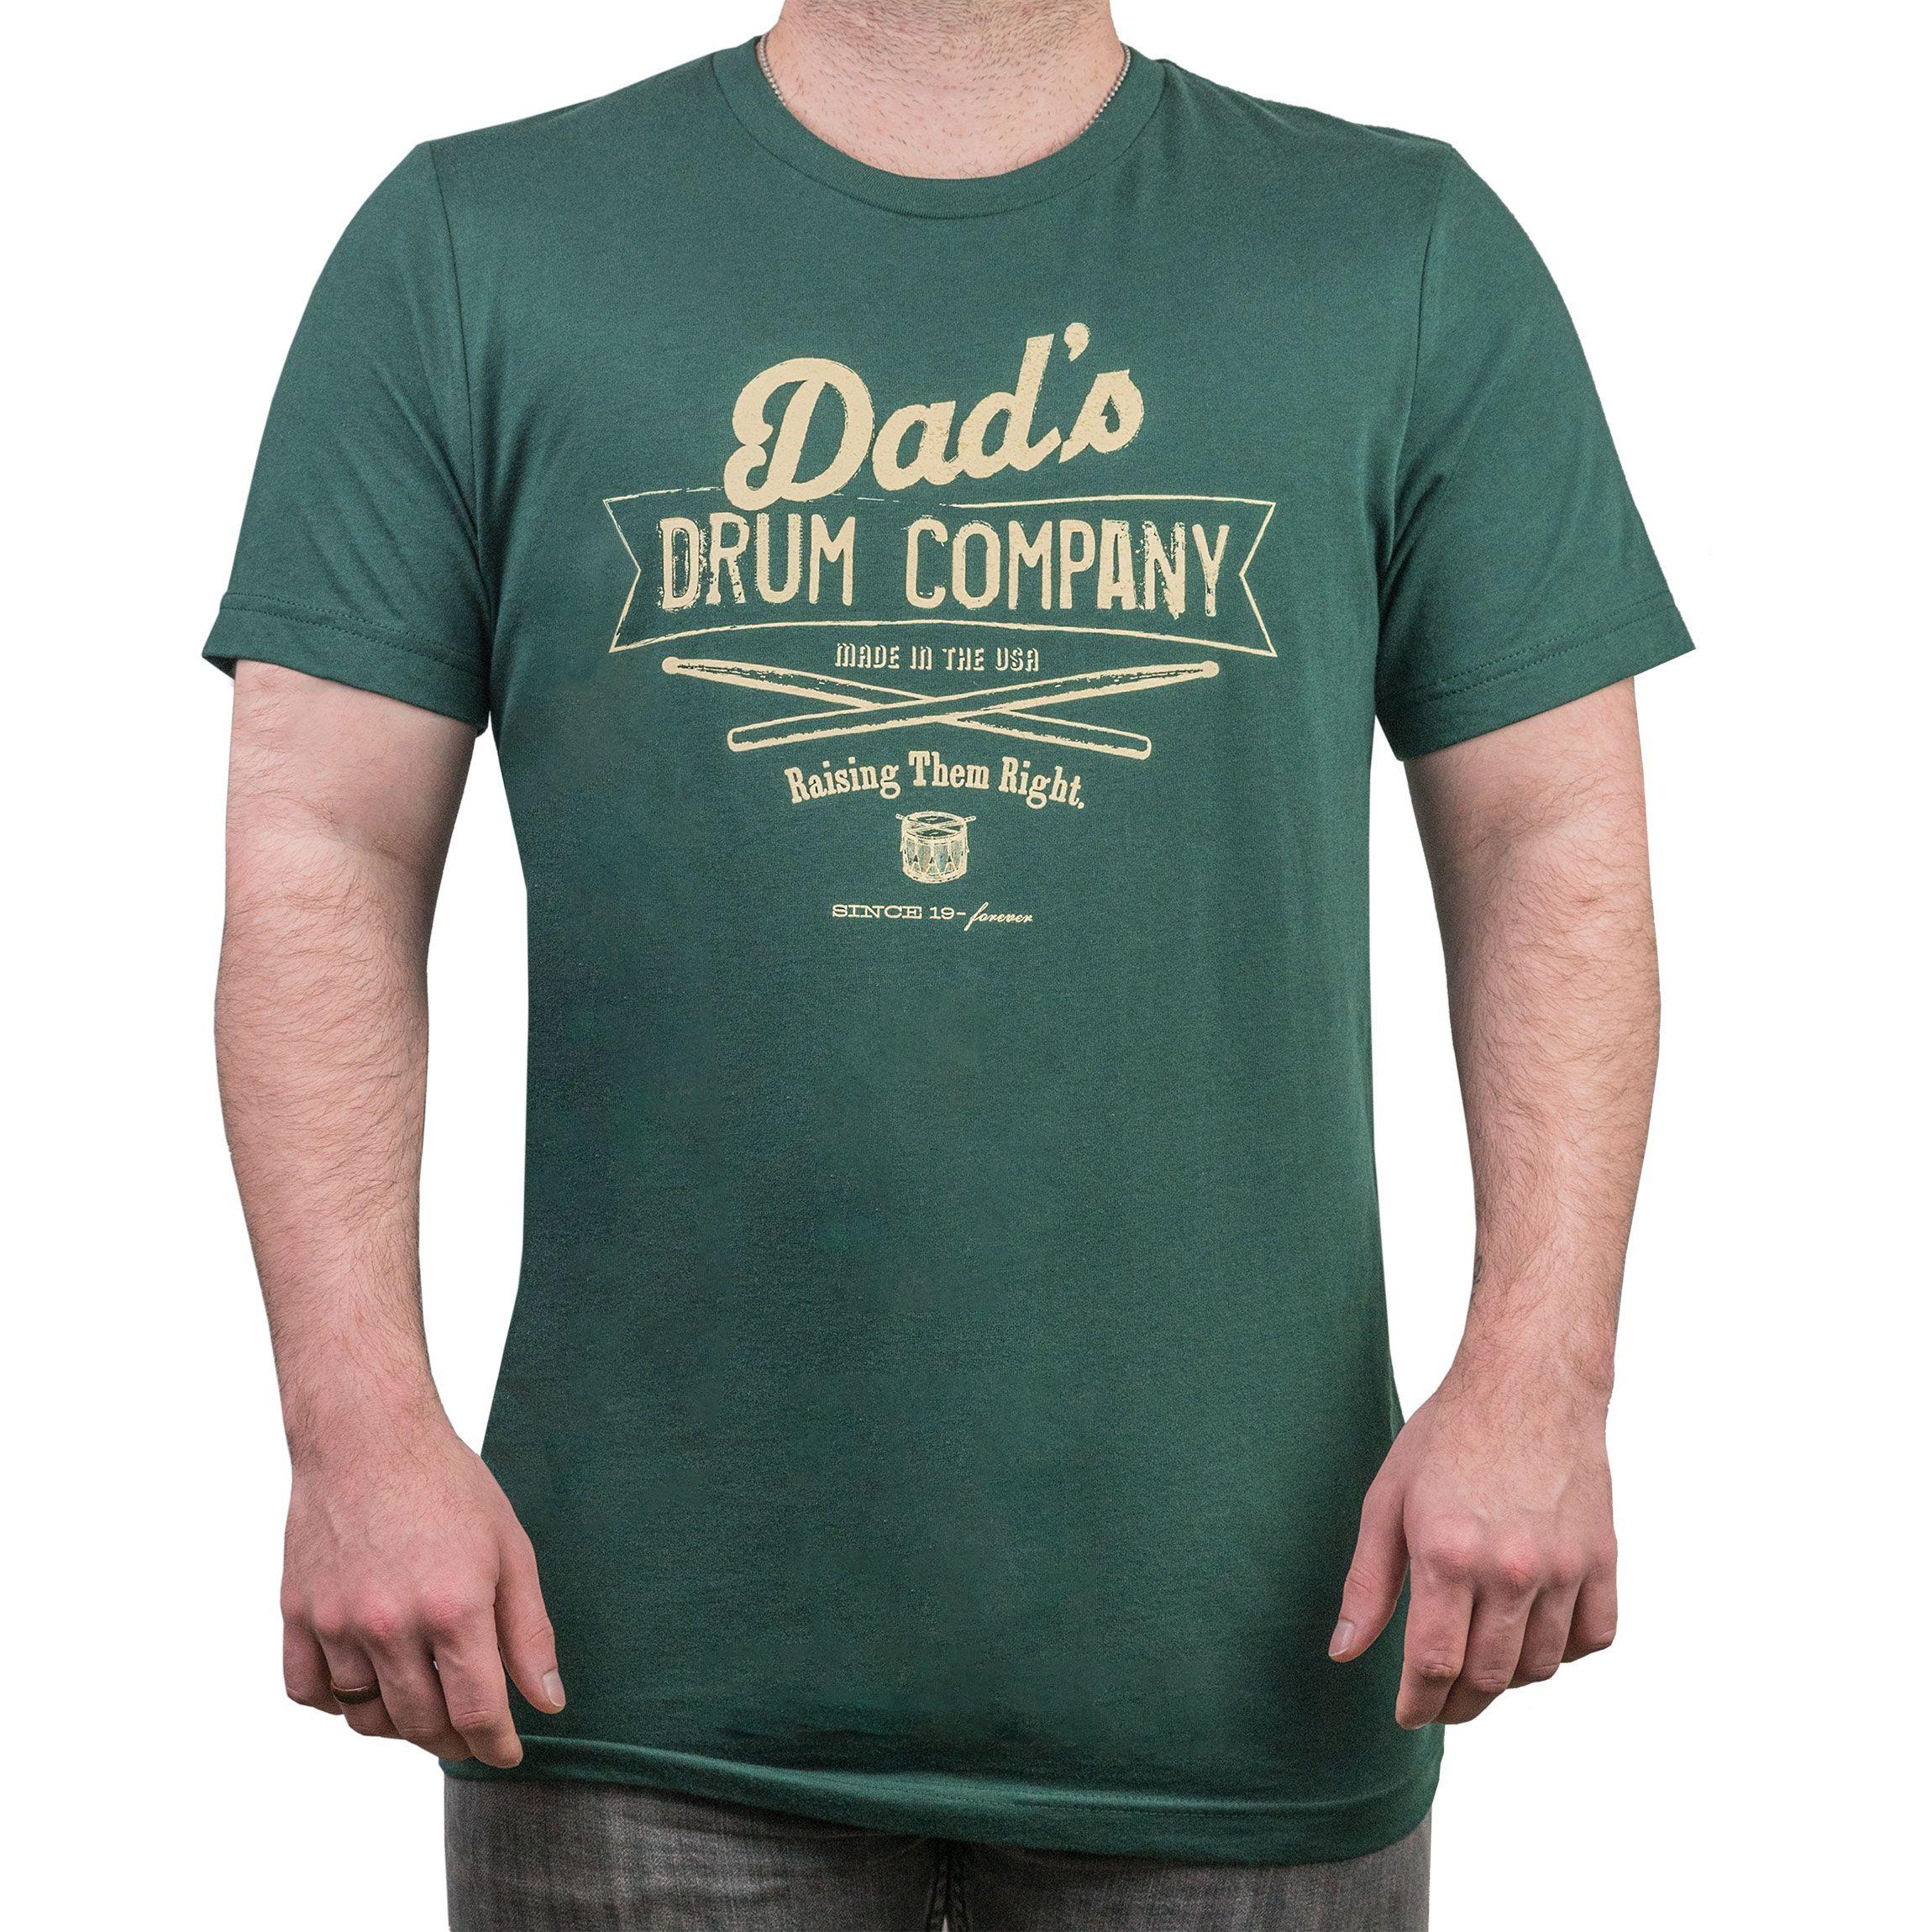 Star Shirt Company Logo - Lone Star Percussion Dad's Drum Company Drummer T Shirt (LSP DADS)